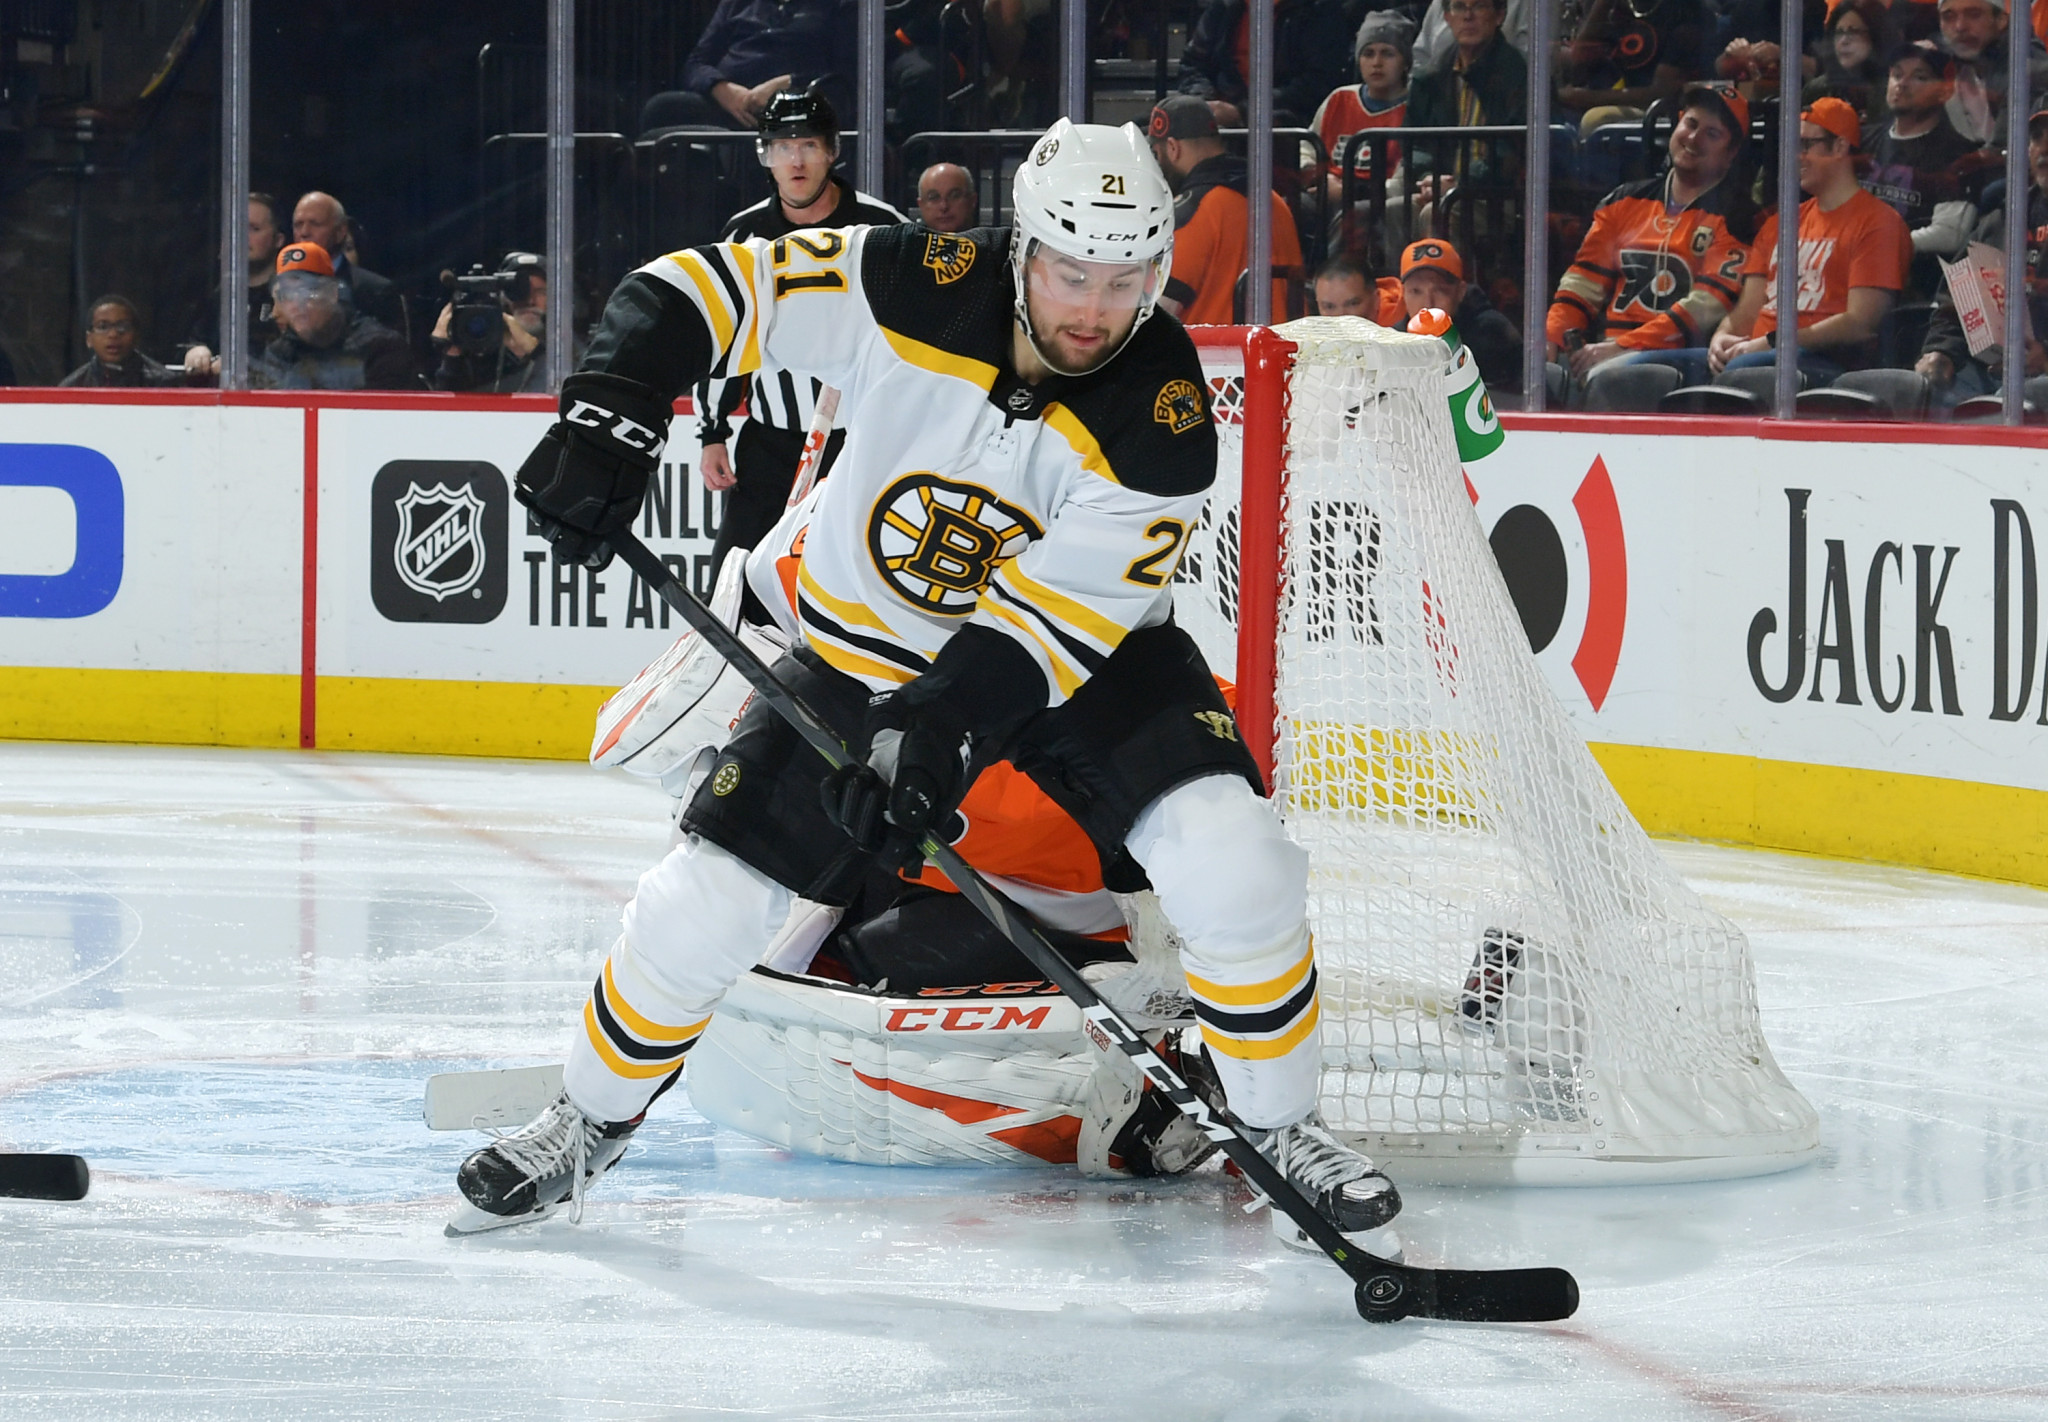 The Boston Bruins would be among the teams to advance to the playoffs ©Getty Images